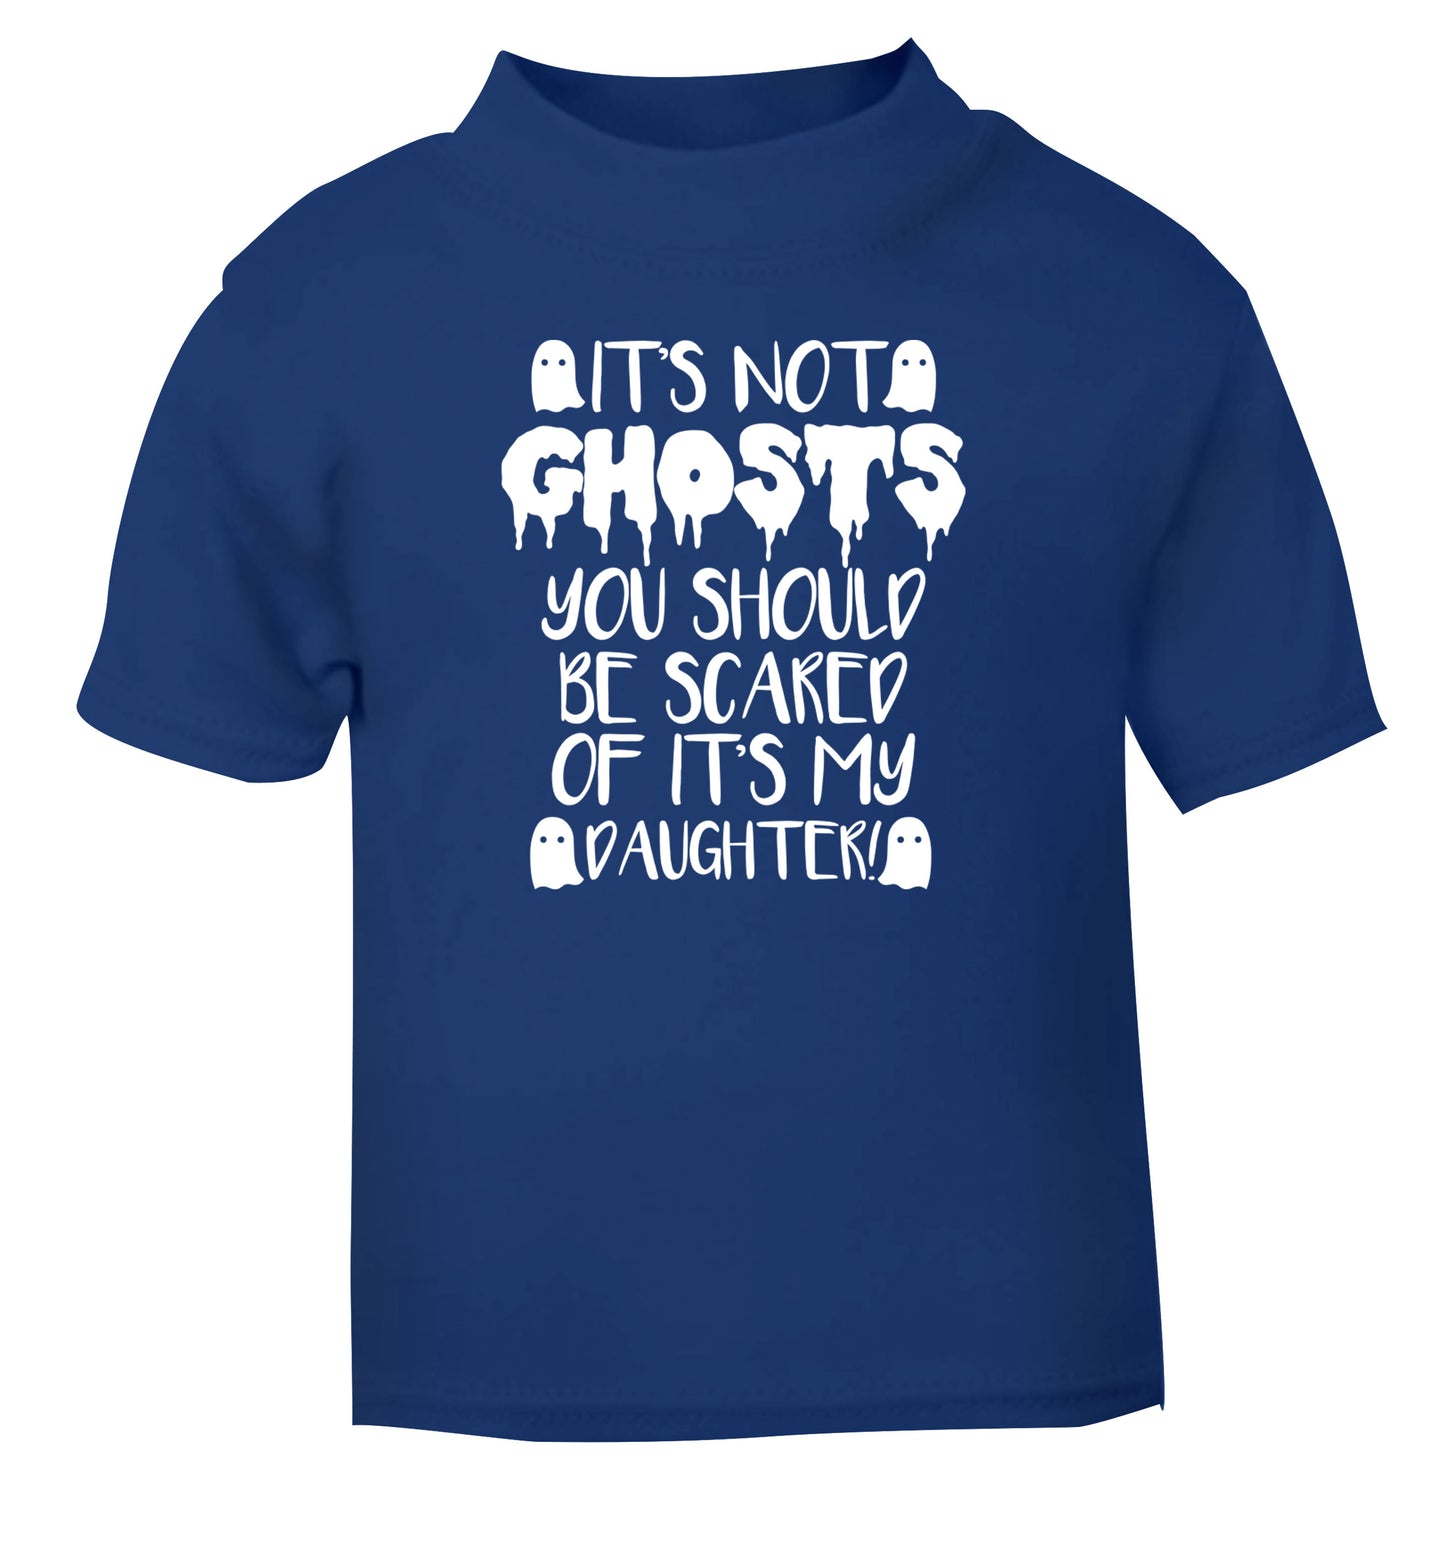 It's not ghosts you should be scared of it's my daughter! blue Baby Toddler Tshirt 2 Years